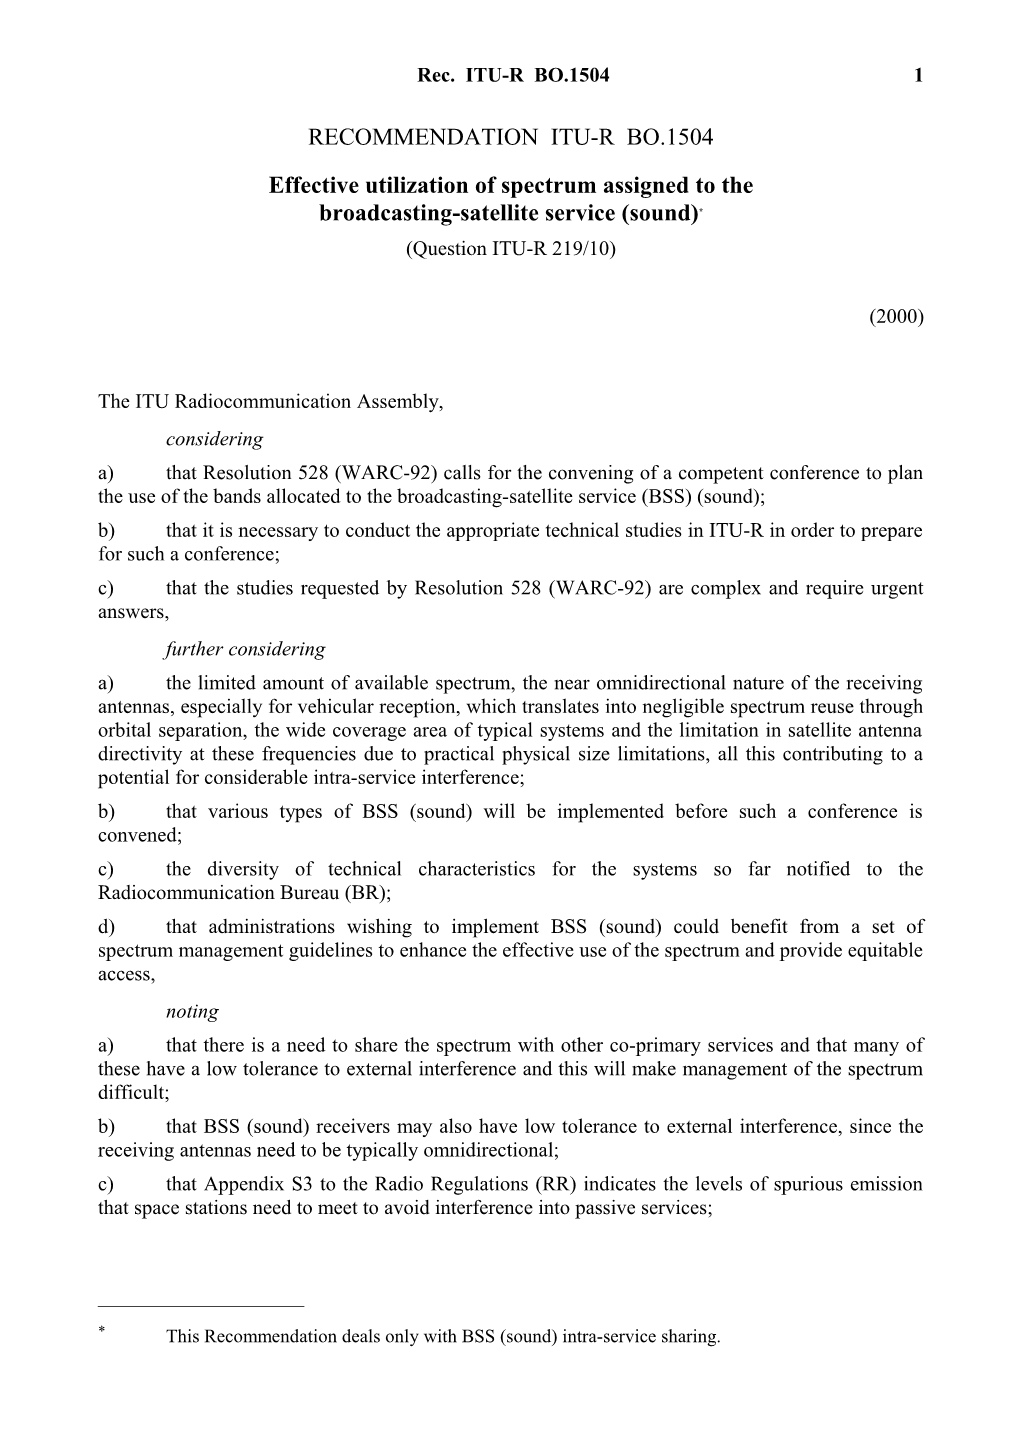 RECOMMENDATION ITU-R BO.1504 - Effective Utilization of Spectrum Assigned to The